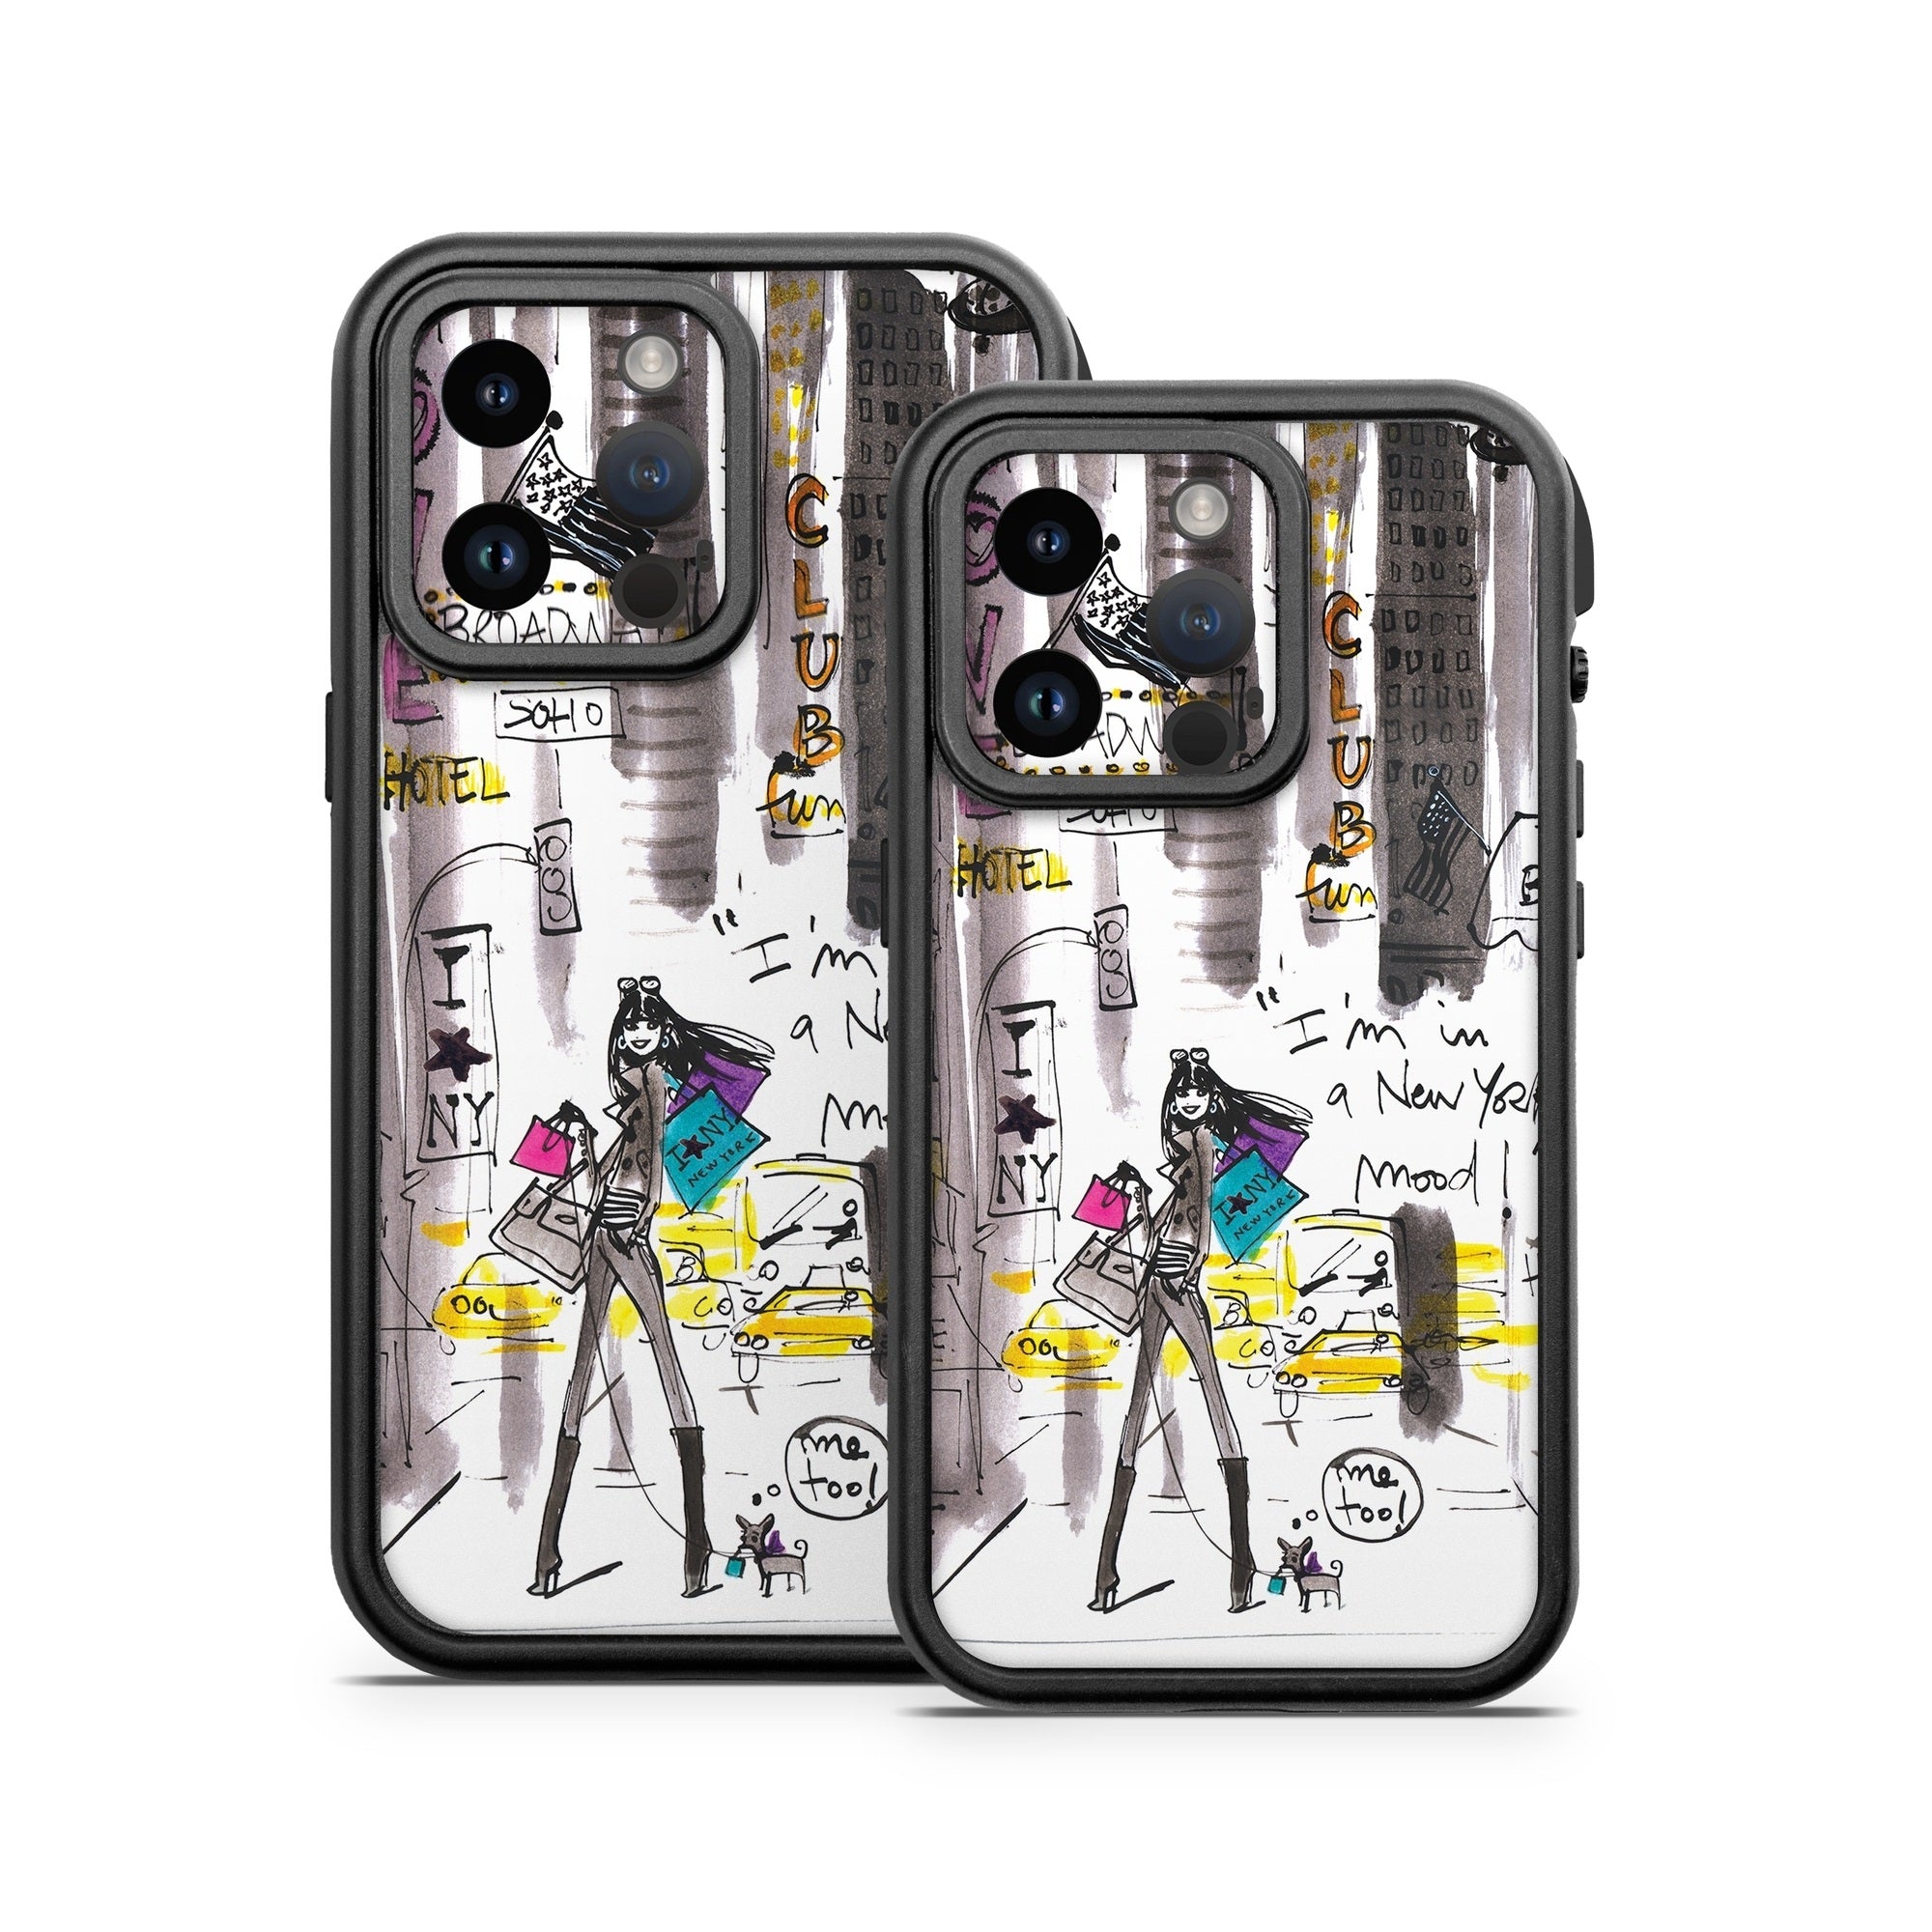 My New York Mood - Otterbox Fre iPhone 14 Case Skin